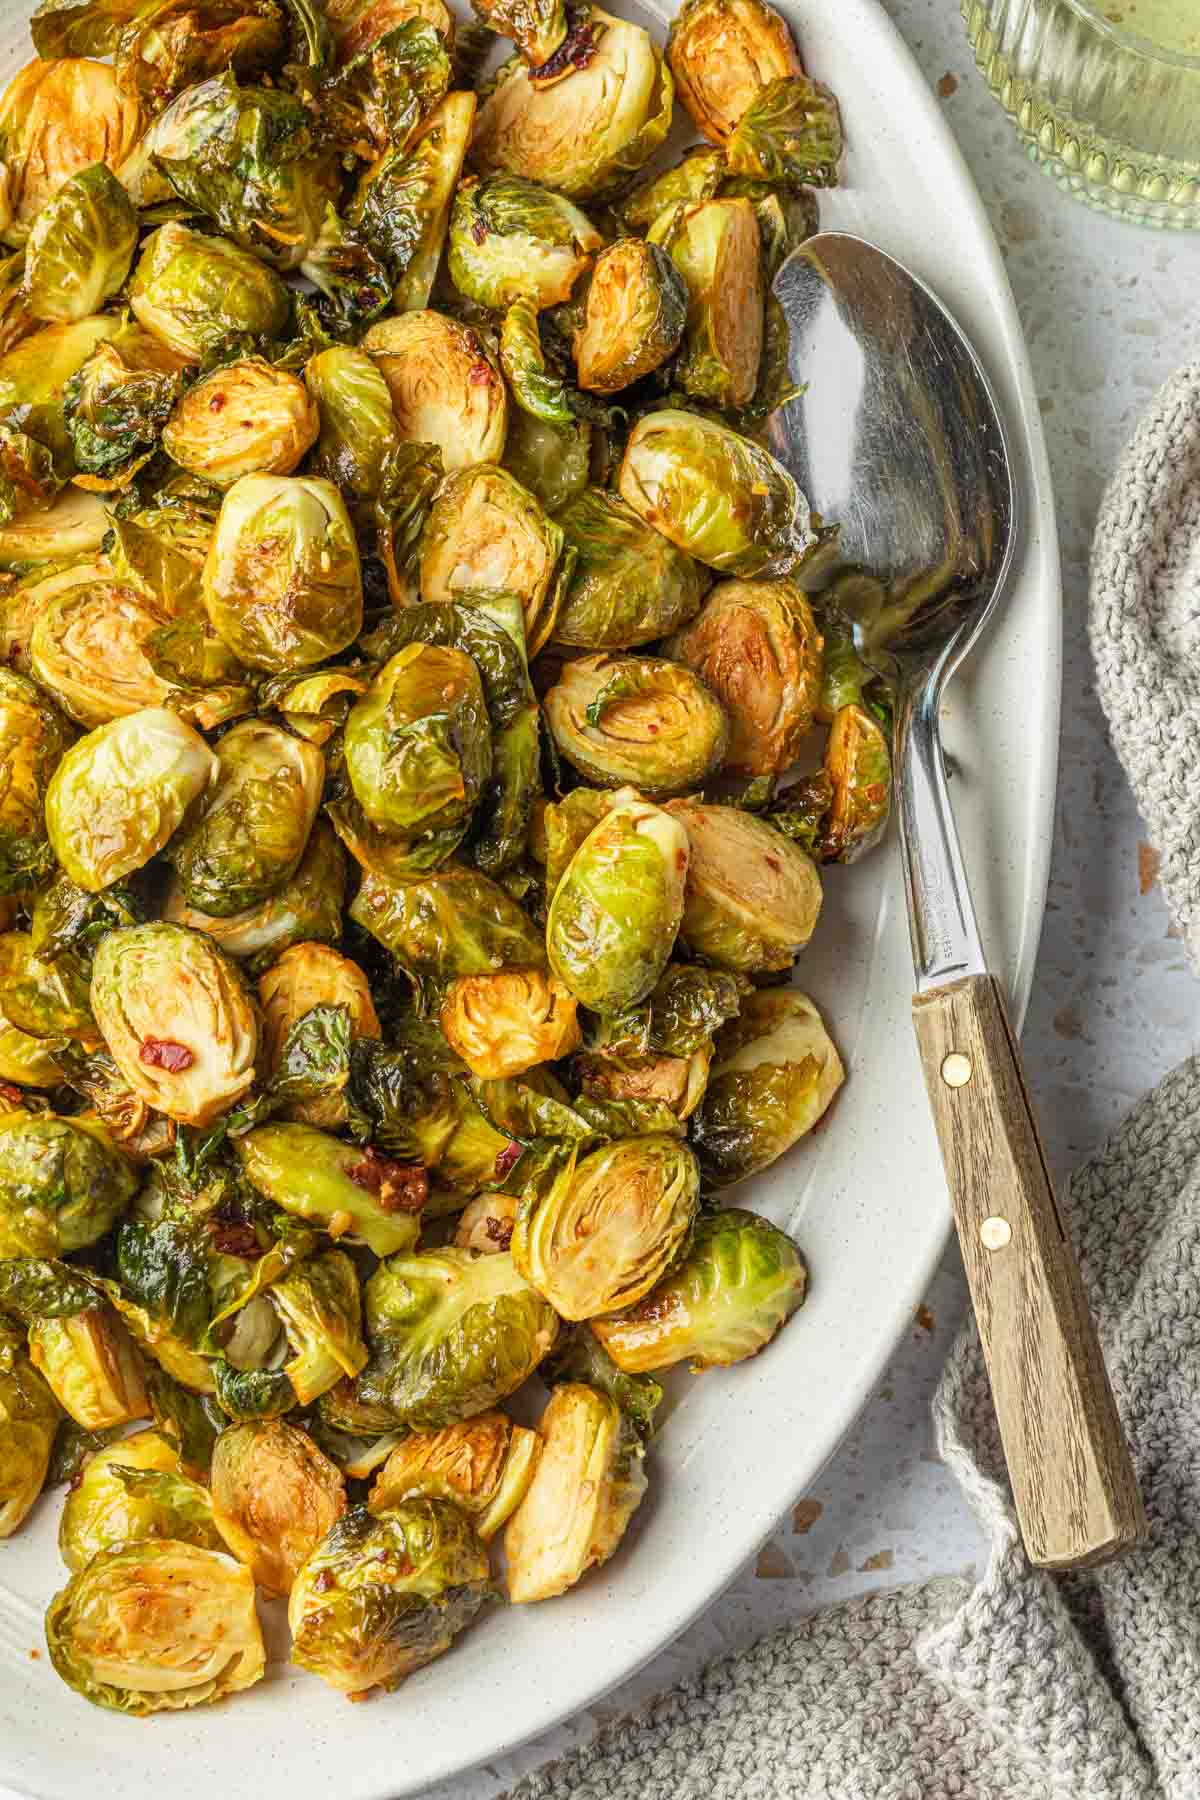 Chipotle Maple Smoked Brussels Sprouts